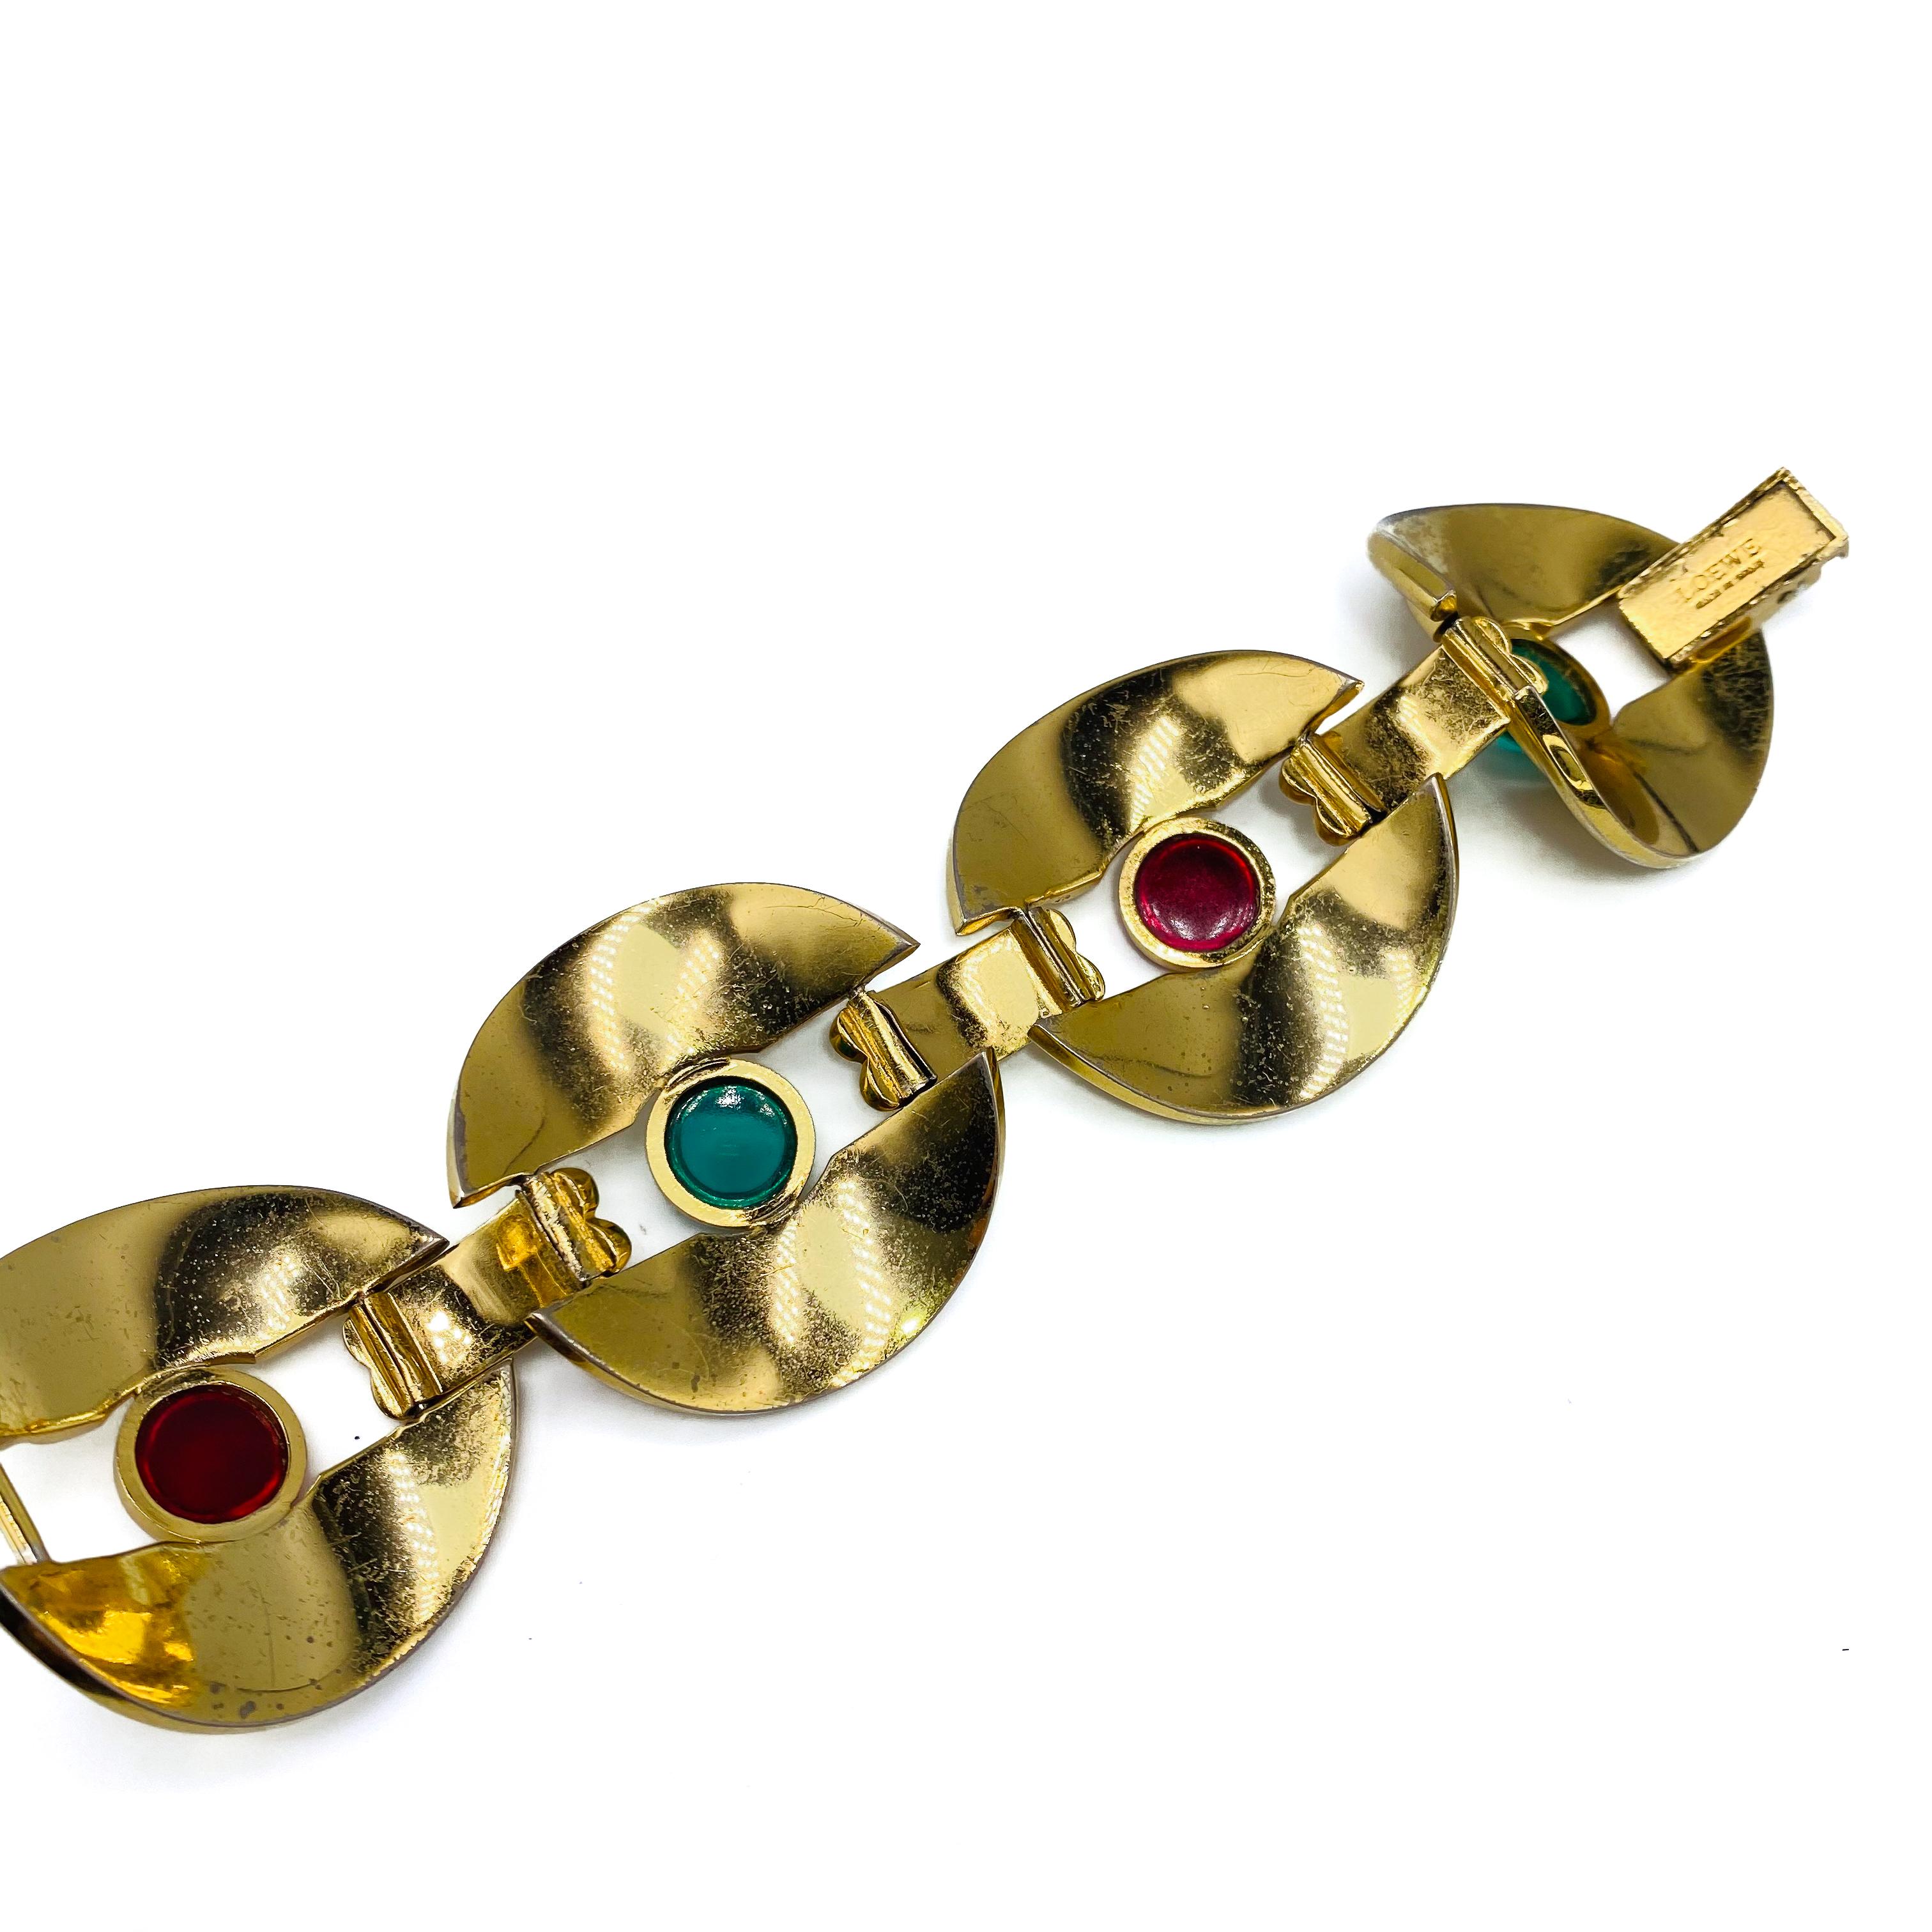 Loewe Vintage Cuff Bracelet 

Incredible cuff bracelet with 1970s mod styling from Loewe. Made in Spain in the early 2000s, this amazing bracelet is crafted from gold plated metal and set with Cabouchon stones

Size & Fit
-Length - 7.5 inches